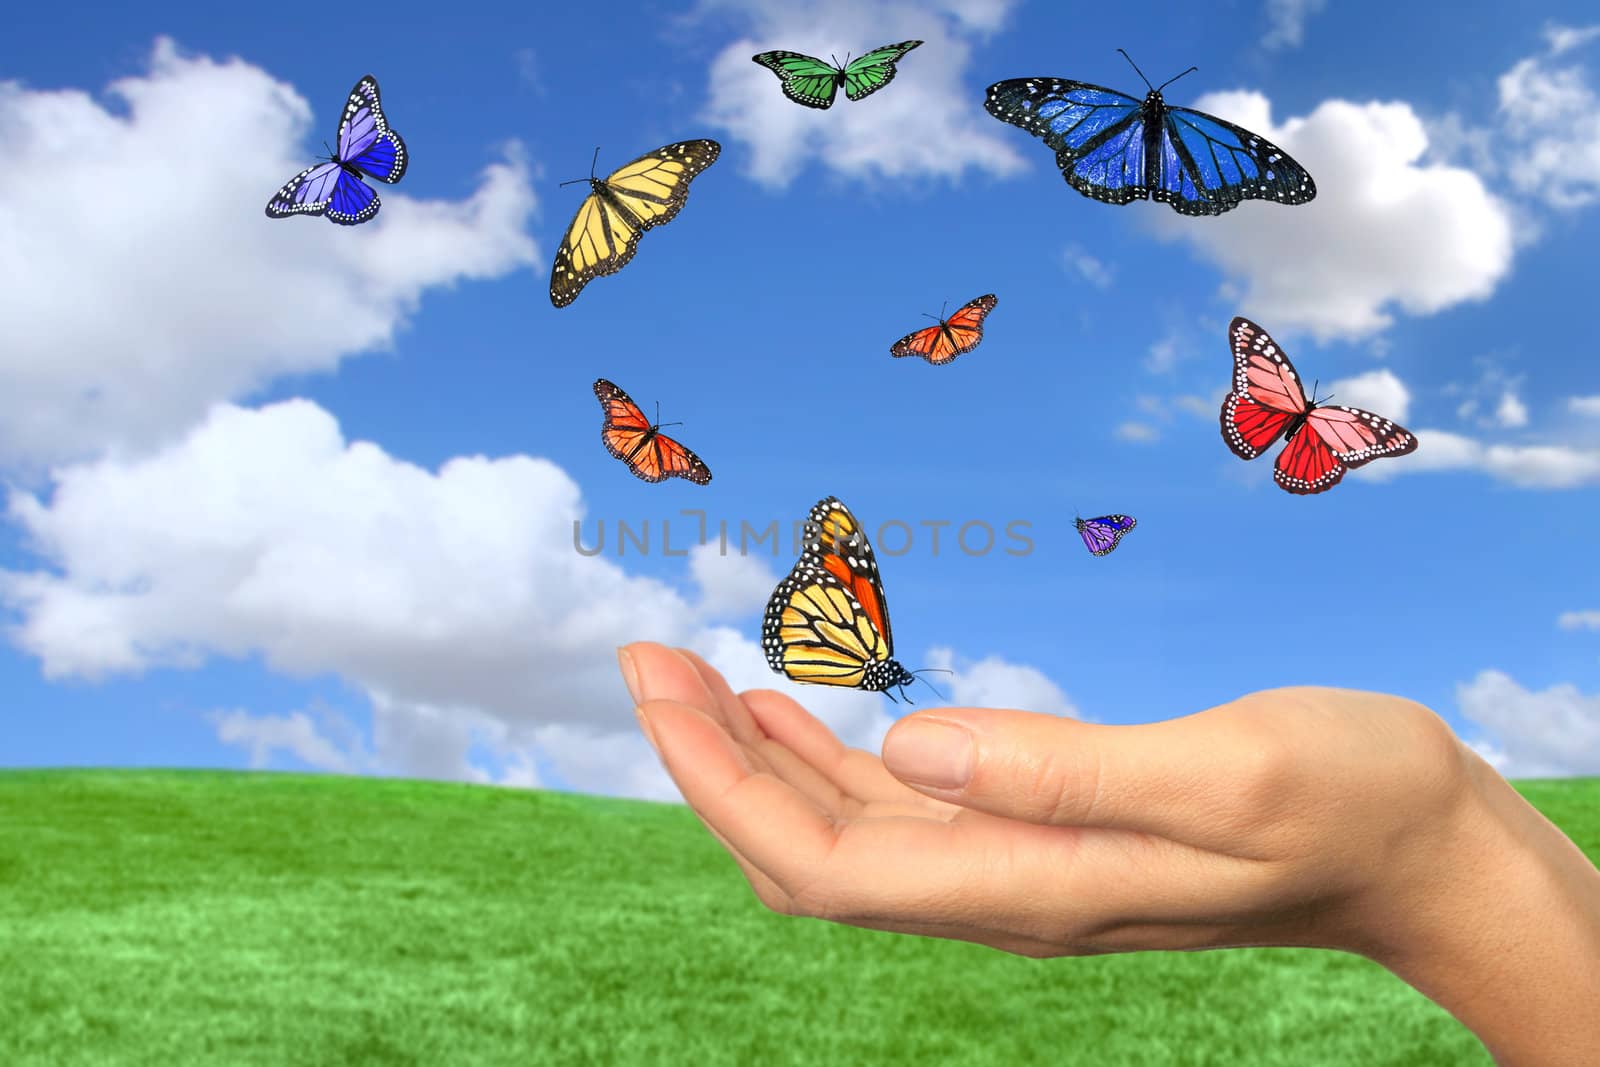 Butterflies Flying Free Against a Beautiful Spring Landscape